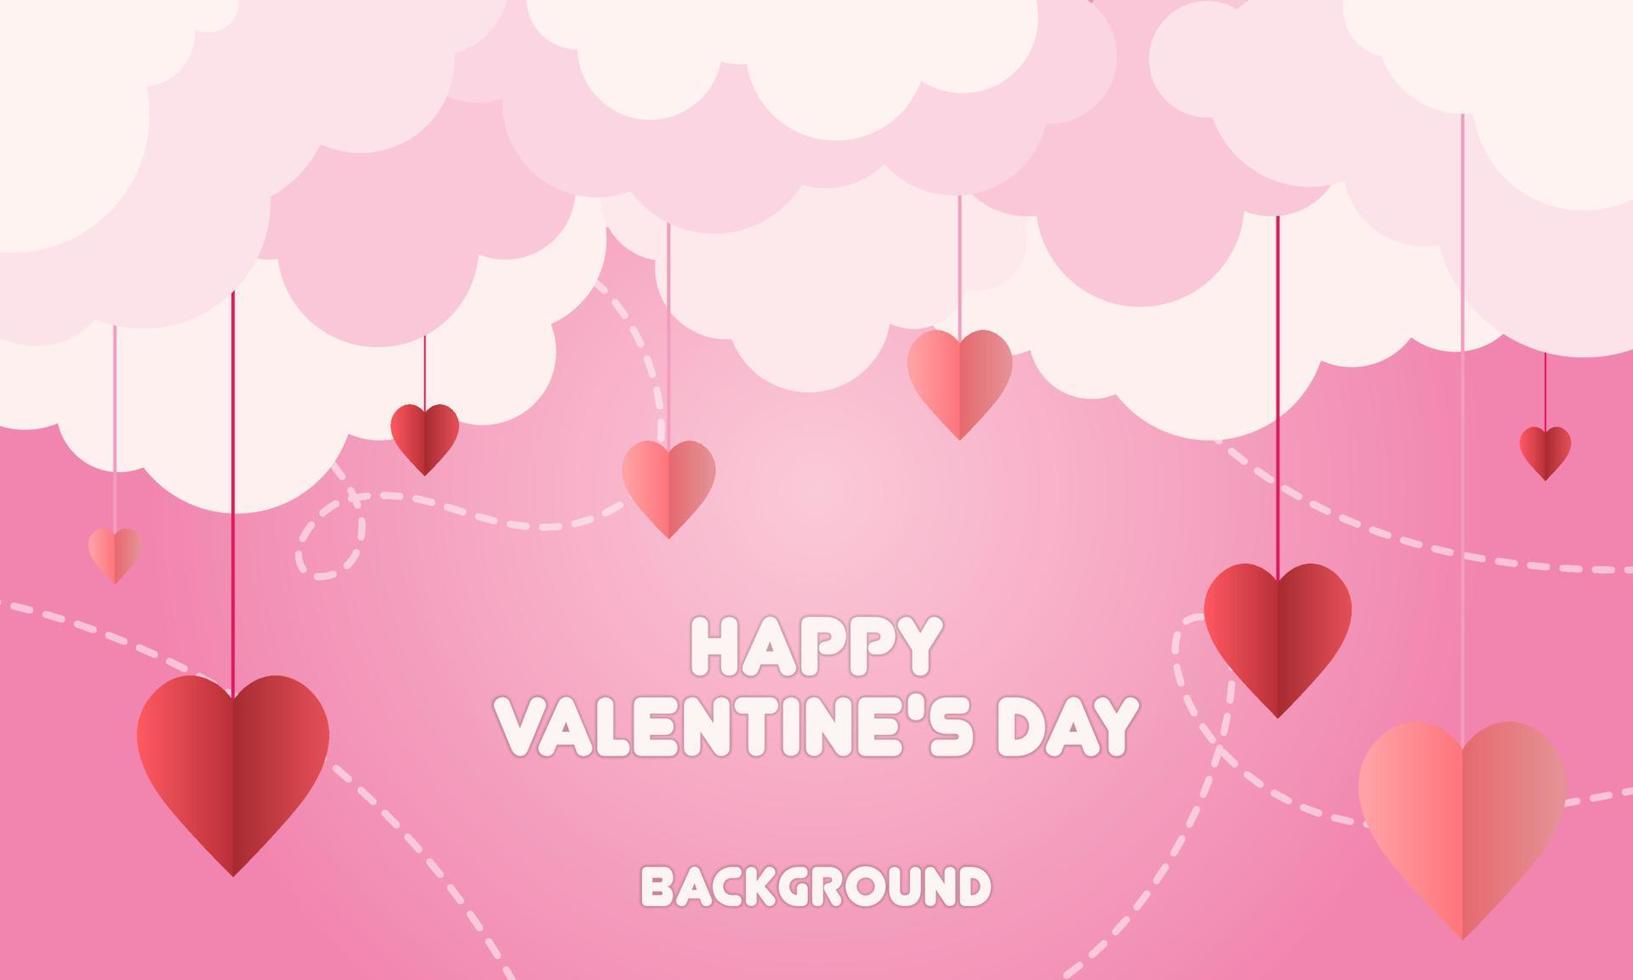 valentine day background with heart love shape icon and cloud on top vector illustrations EPS10